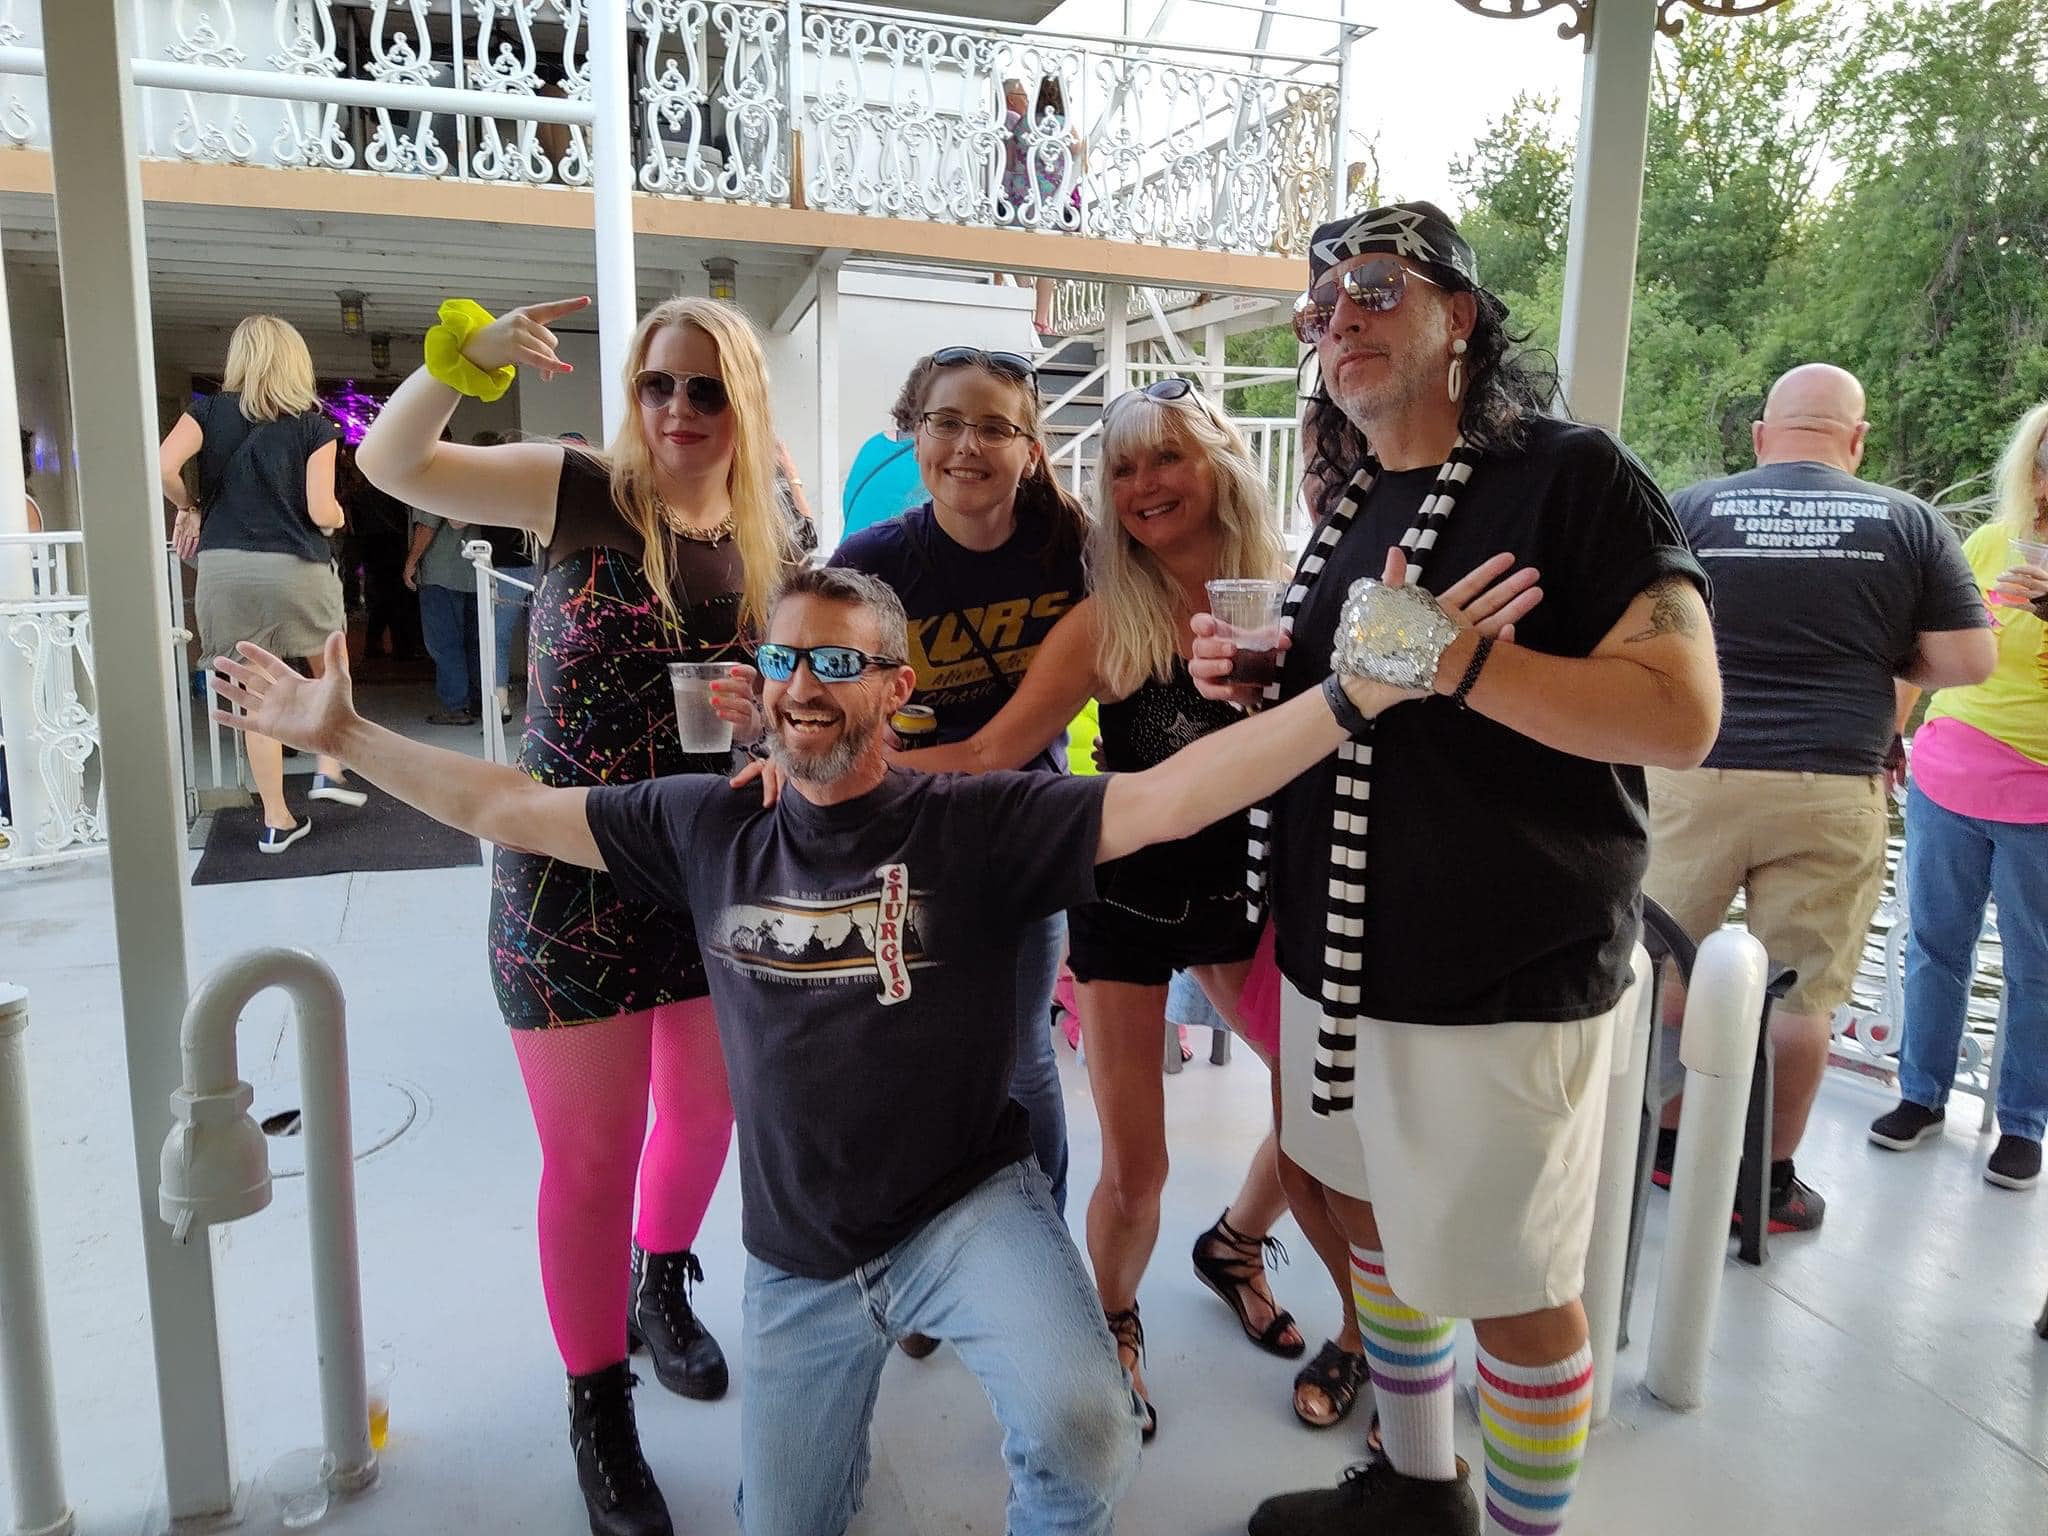 KQ’s Rock The Boat ’80s Cruise: See The Photos